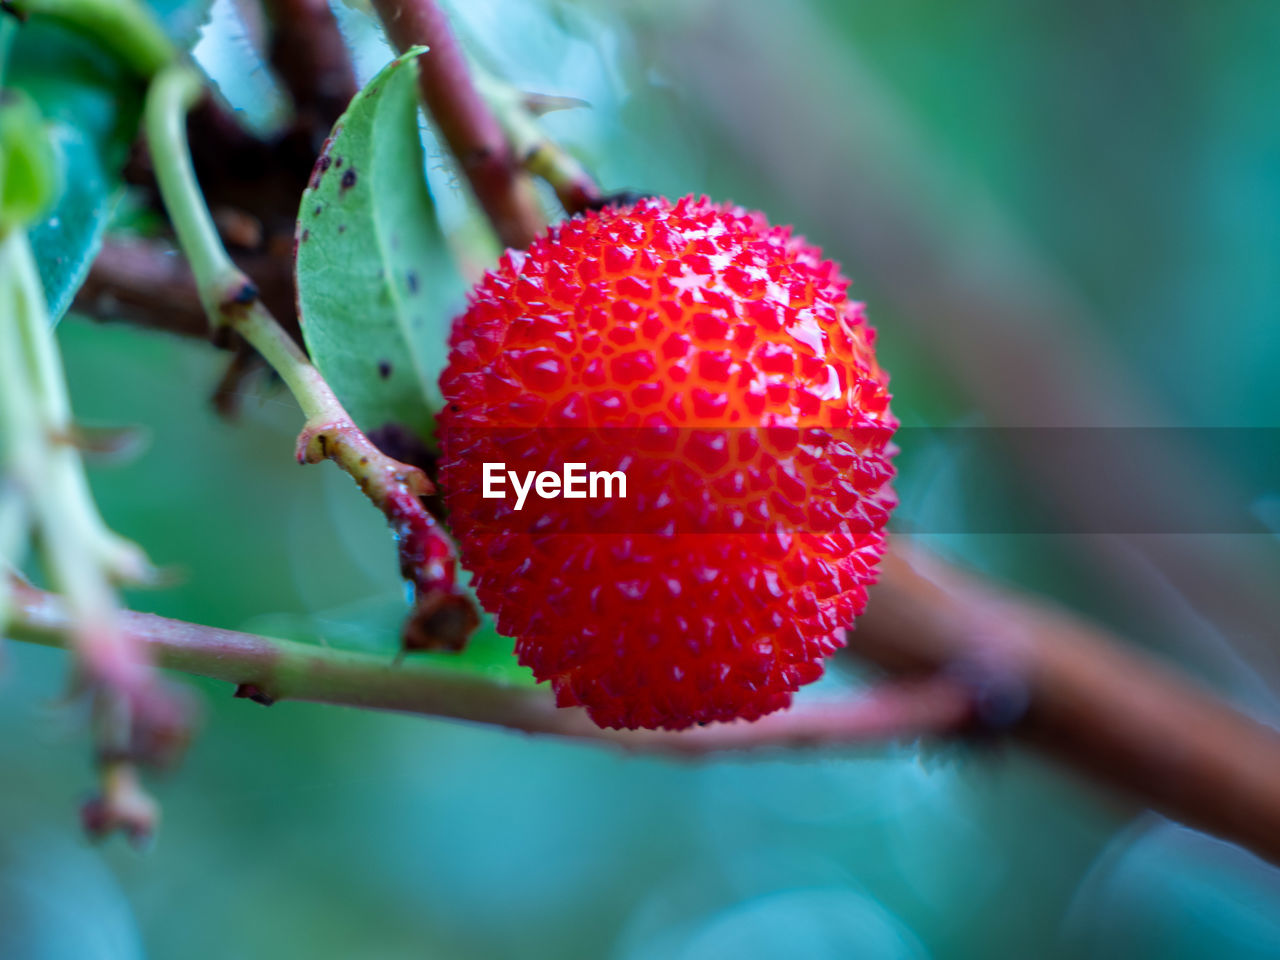 fruit, food, healthy eating, food and drink, plant, freshness, berry, red, close-up, growth, nature, tree, produce, wellbeing, flower, strawberry tree, leaf, plant part, ripe, macro photography, branch, no people, day, selective focus, outdoors, agriculture, strawberry, focus on foreground, juicy, beauty in nature